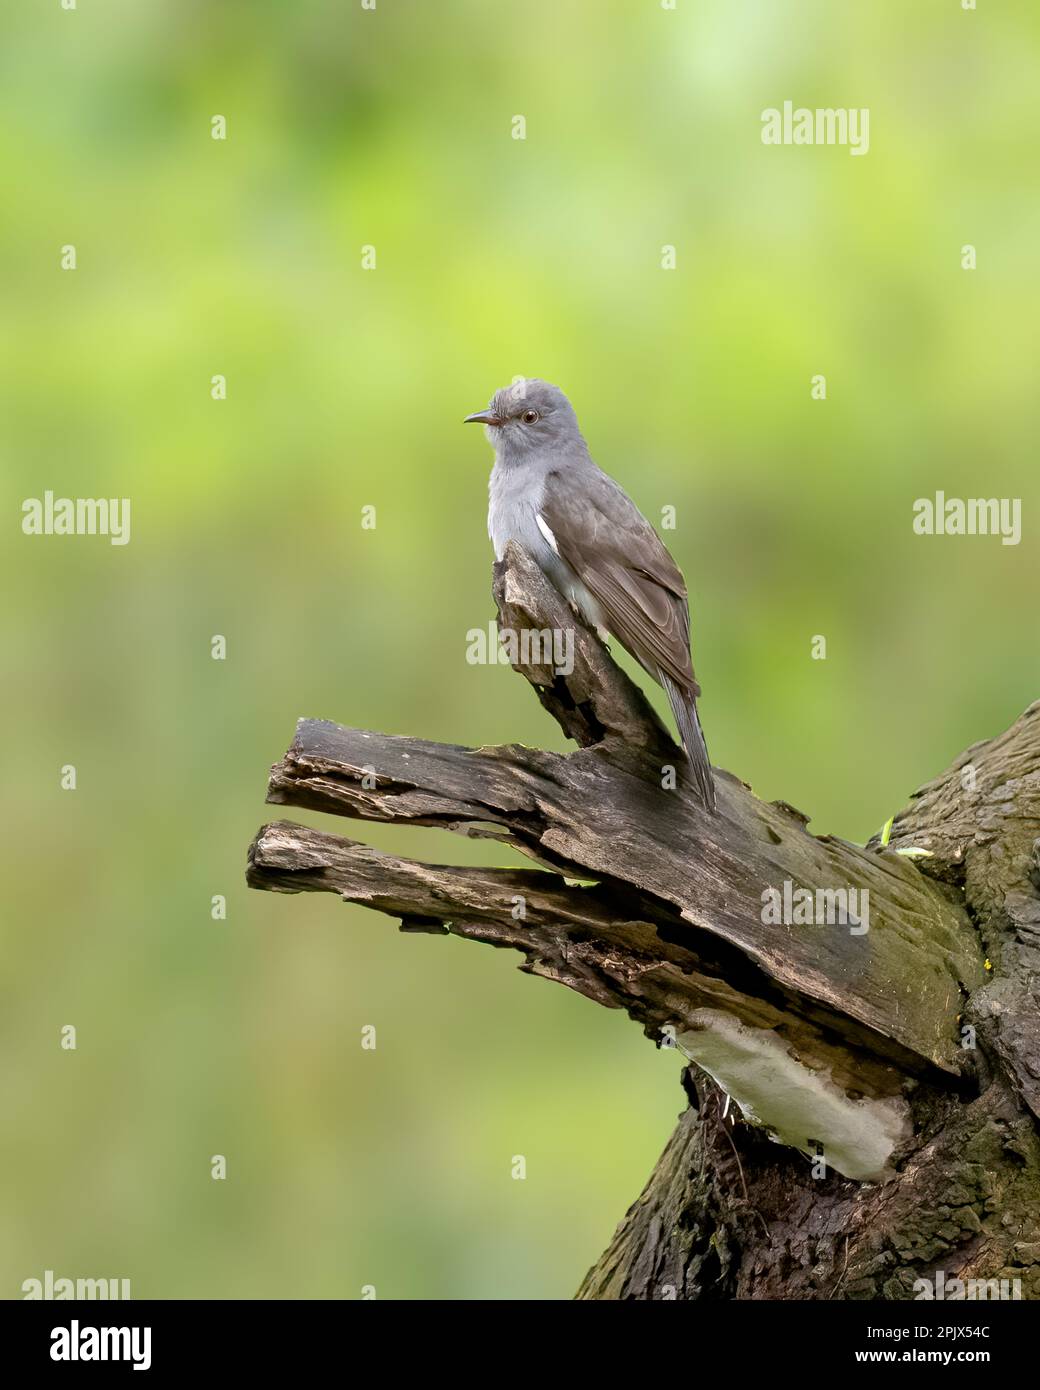 a lone grey-bellied cuckoo (Cacomantis passerinus), perched on a dead tree branch in the wild, also called the indian plaintive cuckoo. Stock Photo